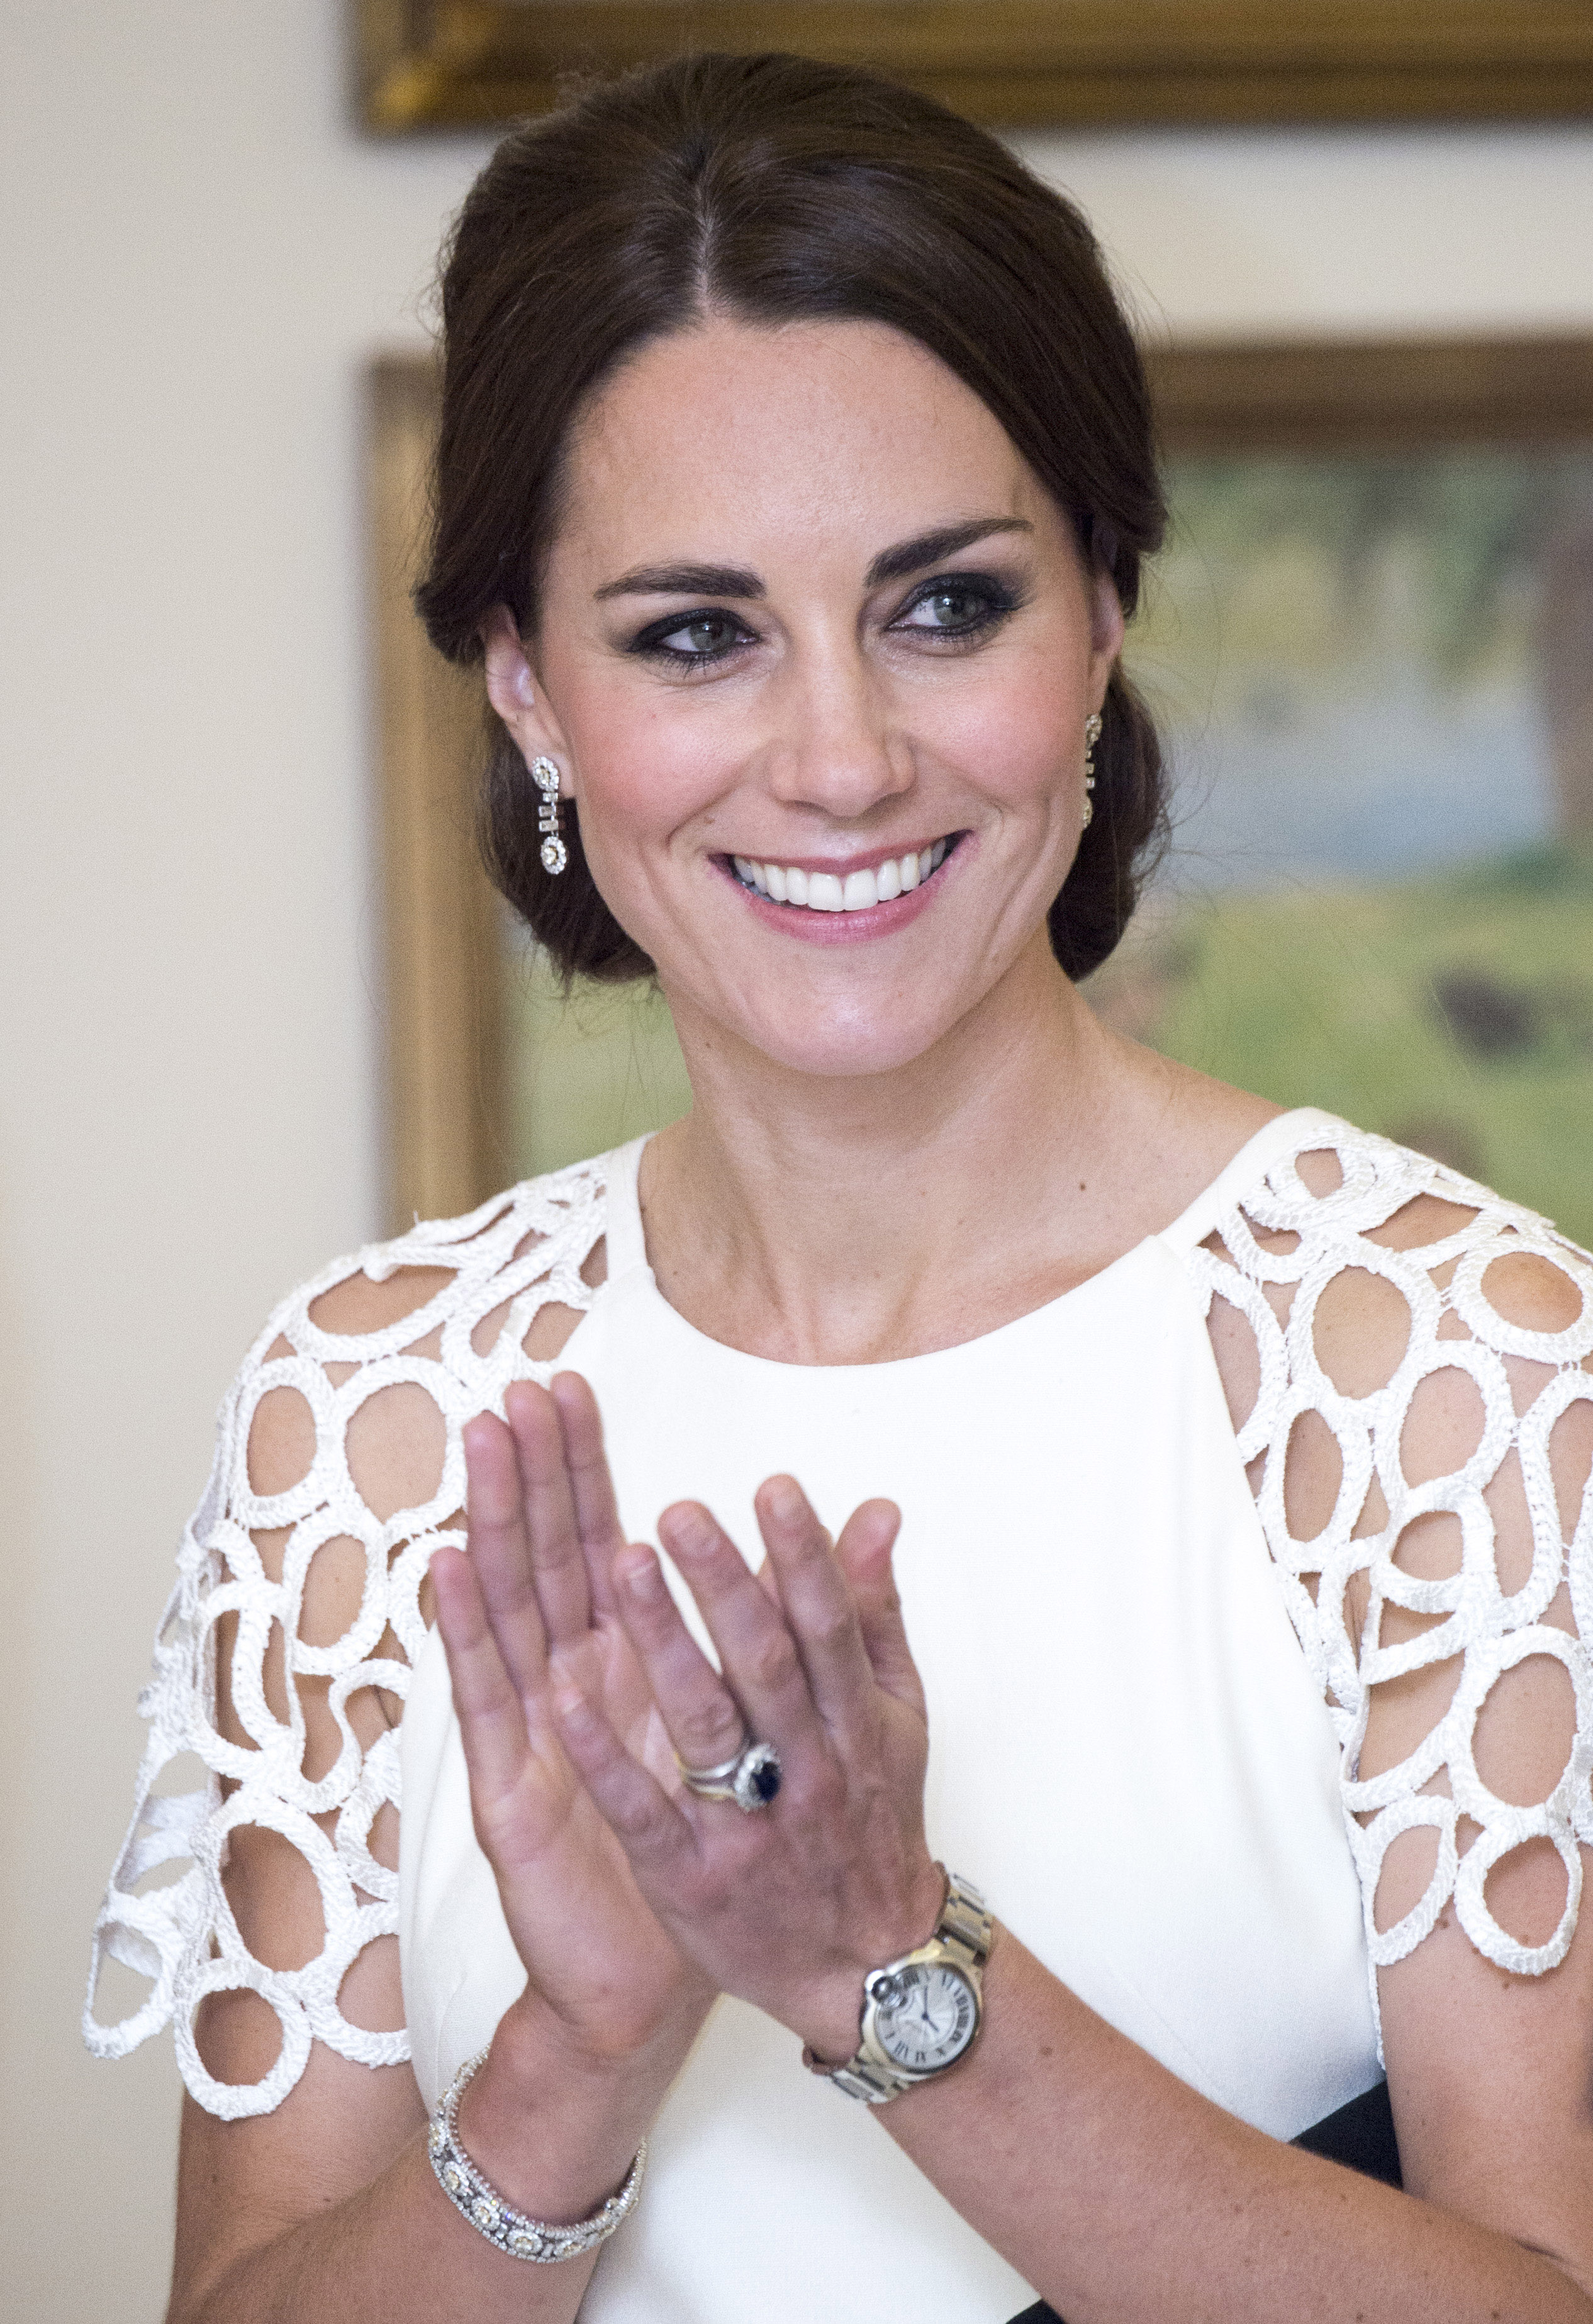 CANBERRA, AUSTRALIA - APRIL 24:  Catherine, Duchess of Cambridge is seen as she attends a reception hosted by the Governor General Peter Cosgrove and Her excellency Lady Cosgrove at Government House on April 24, 2014 in Canberra, Australia. The Duke and Duchess of Cambridge are on a three-week tour of Australia and New Zealand, the first official trip overseas with their son, Prince George of Cambridge.  (Photo by Arthur Edwards - Pool/Getty Images)